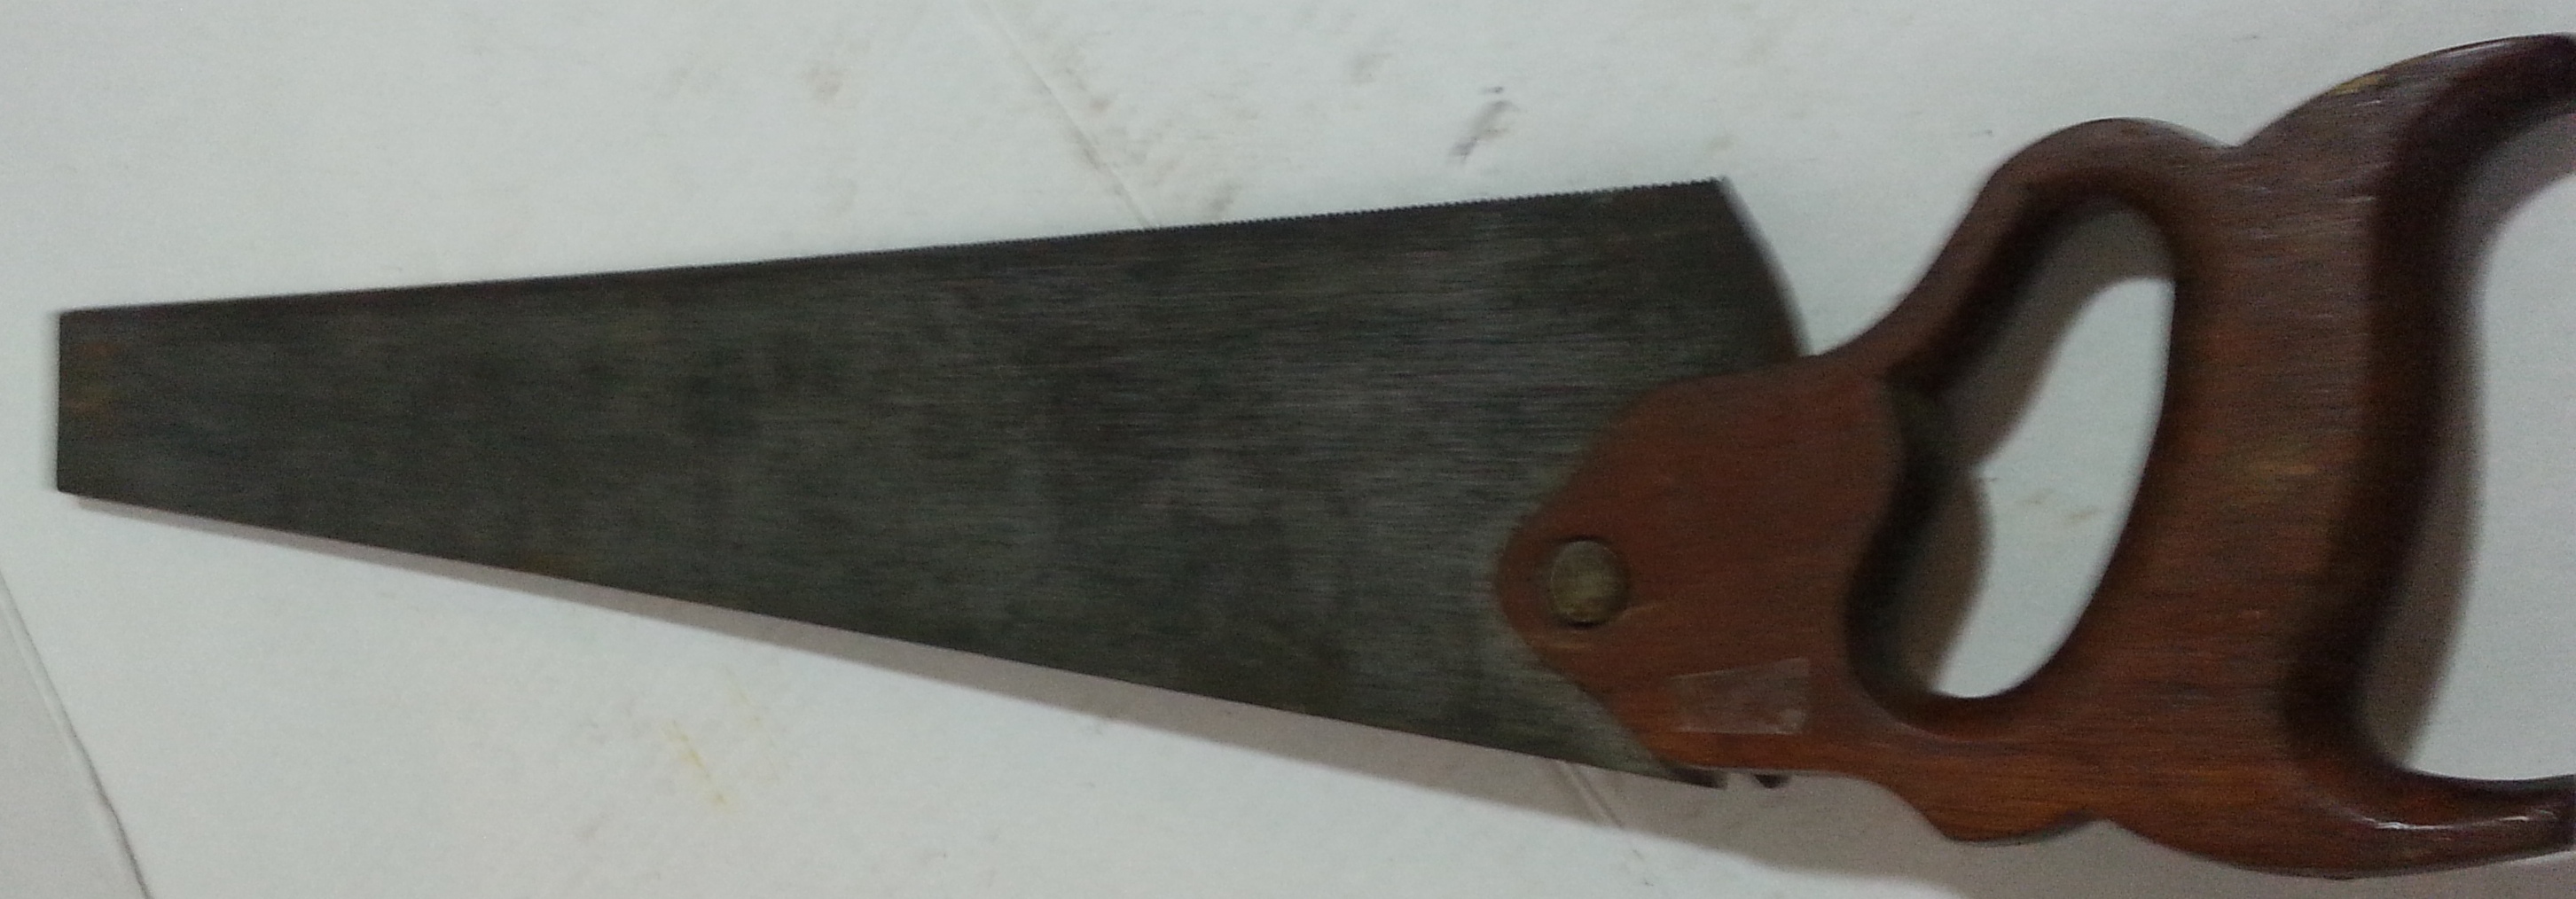 antique saw with blade changing latch